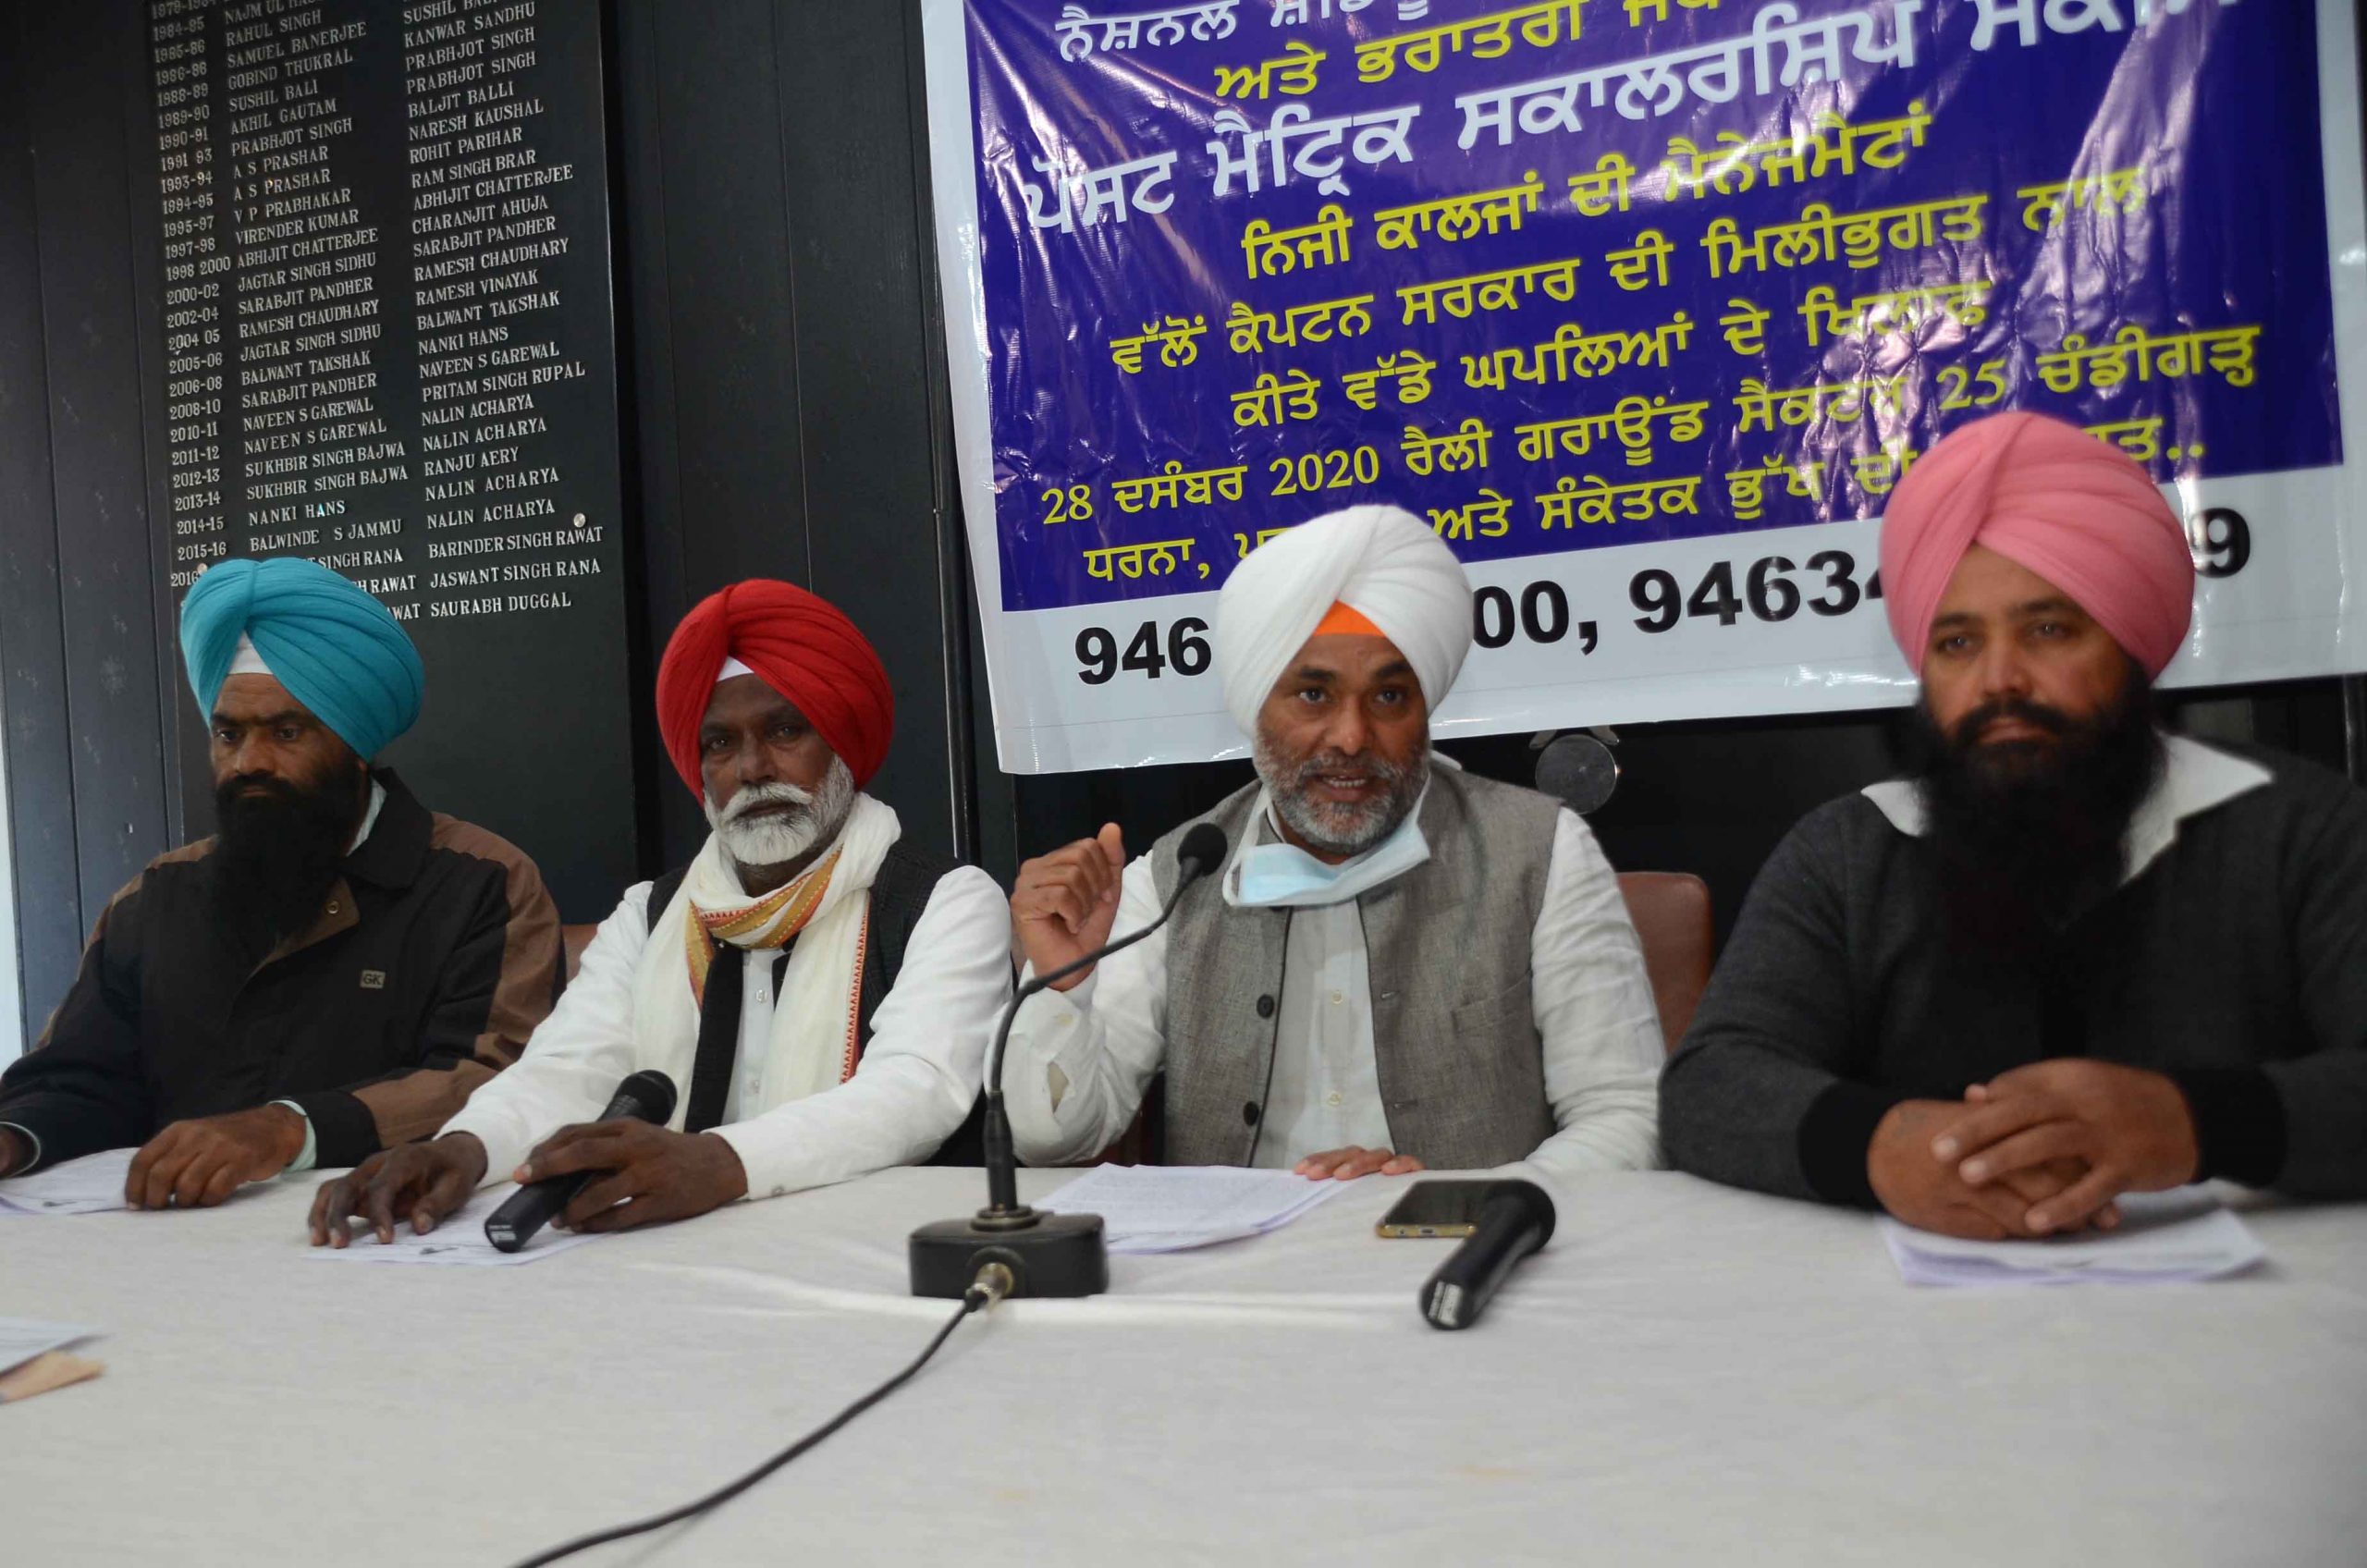 Indefinite symbolic hunger strike in Chandigarh on 28th regarding SC issues in State – Kainth